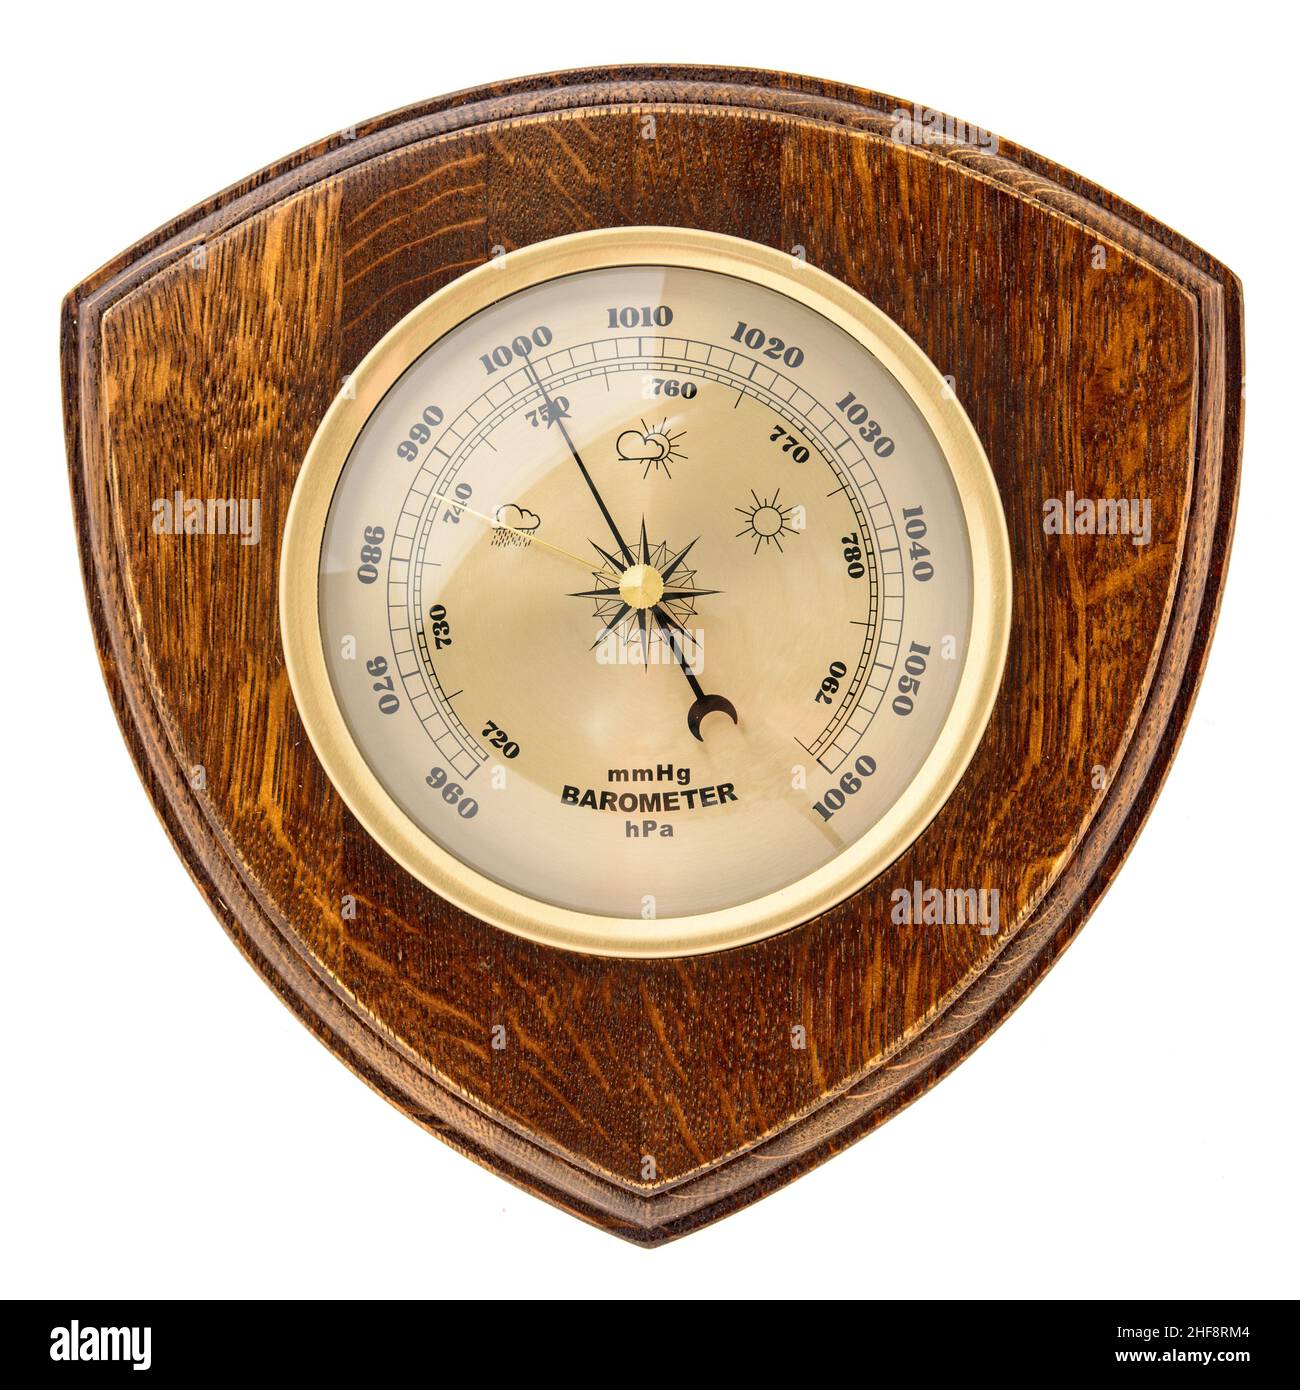 Vintage wooden clock with barometer and Old marine style thermometer on a white background. Wall decor for the interior. Stock Photo